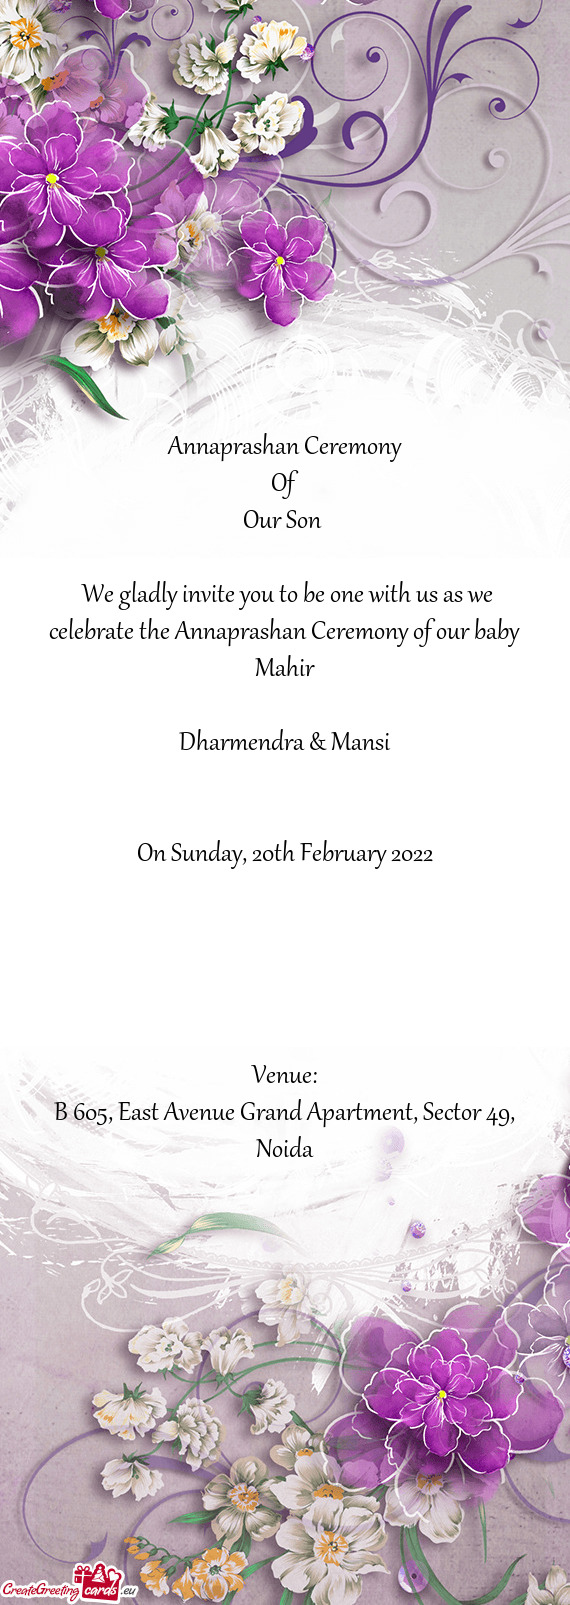 We gladly invite you to be one with us as we celebrate the Annaprashan Ceremony of our baby Mahir